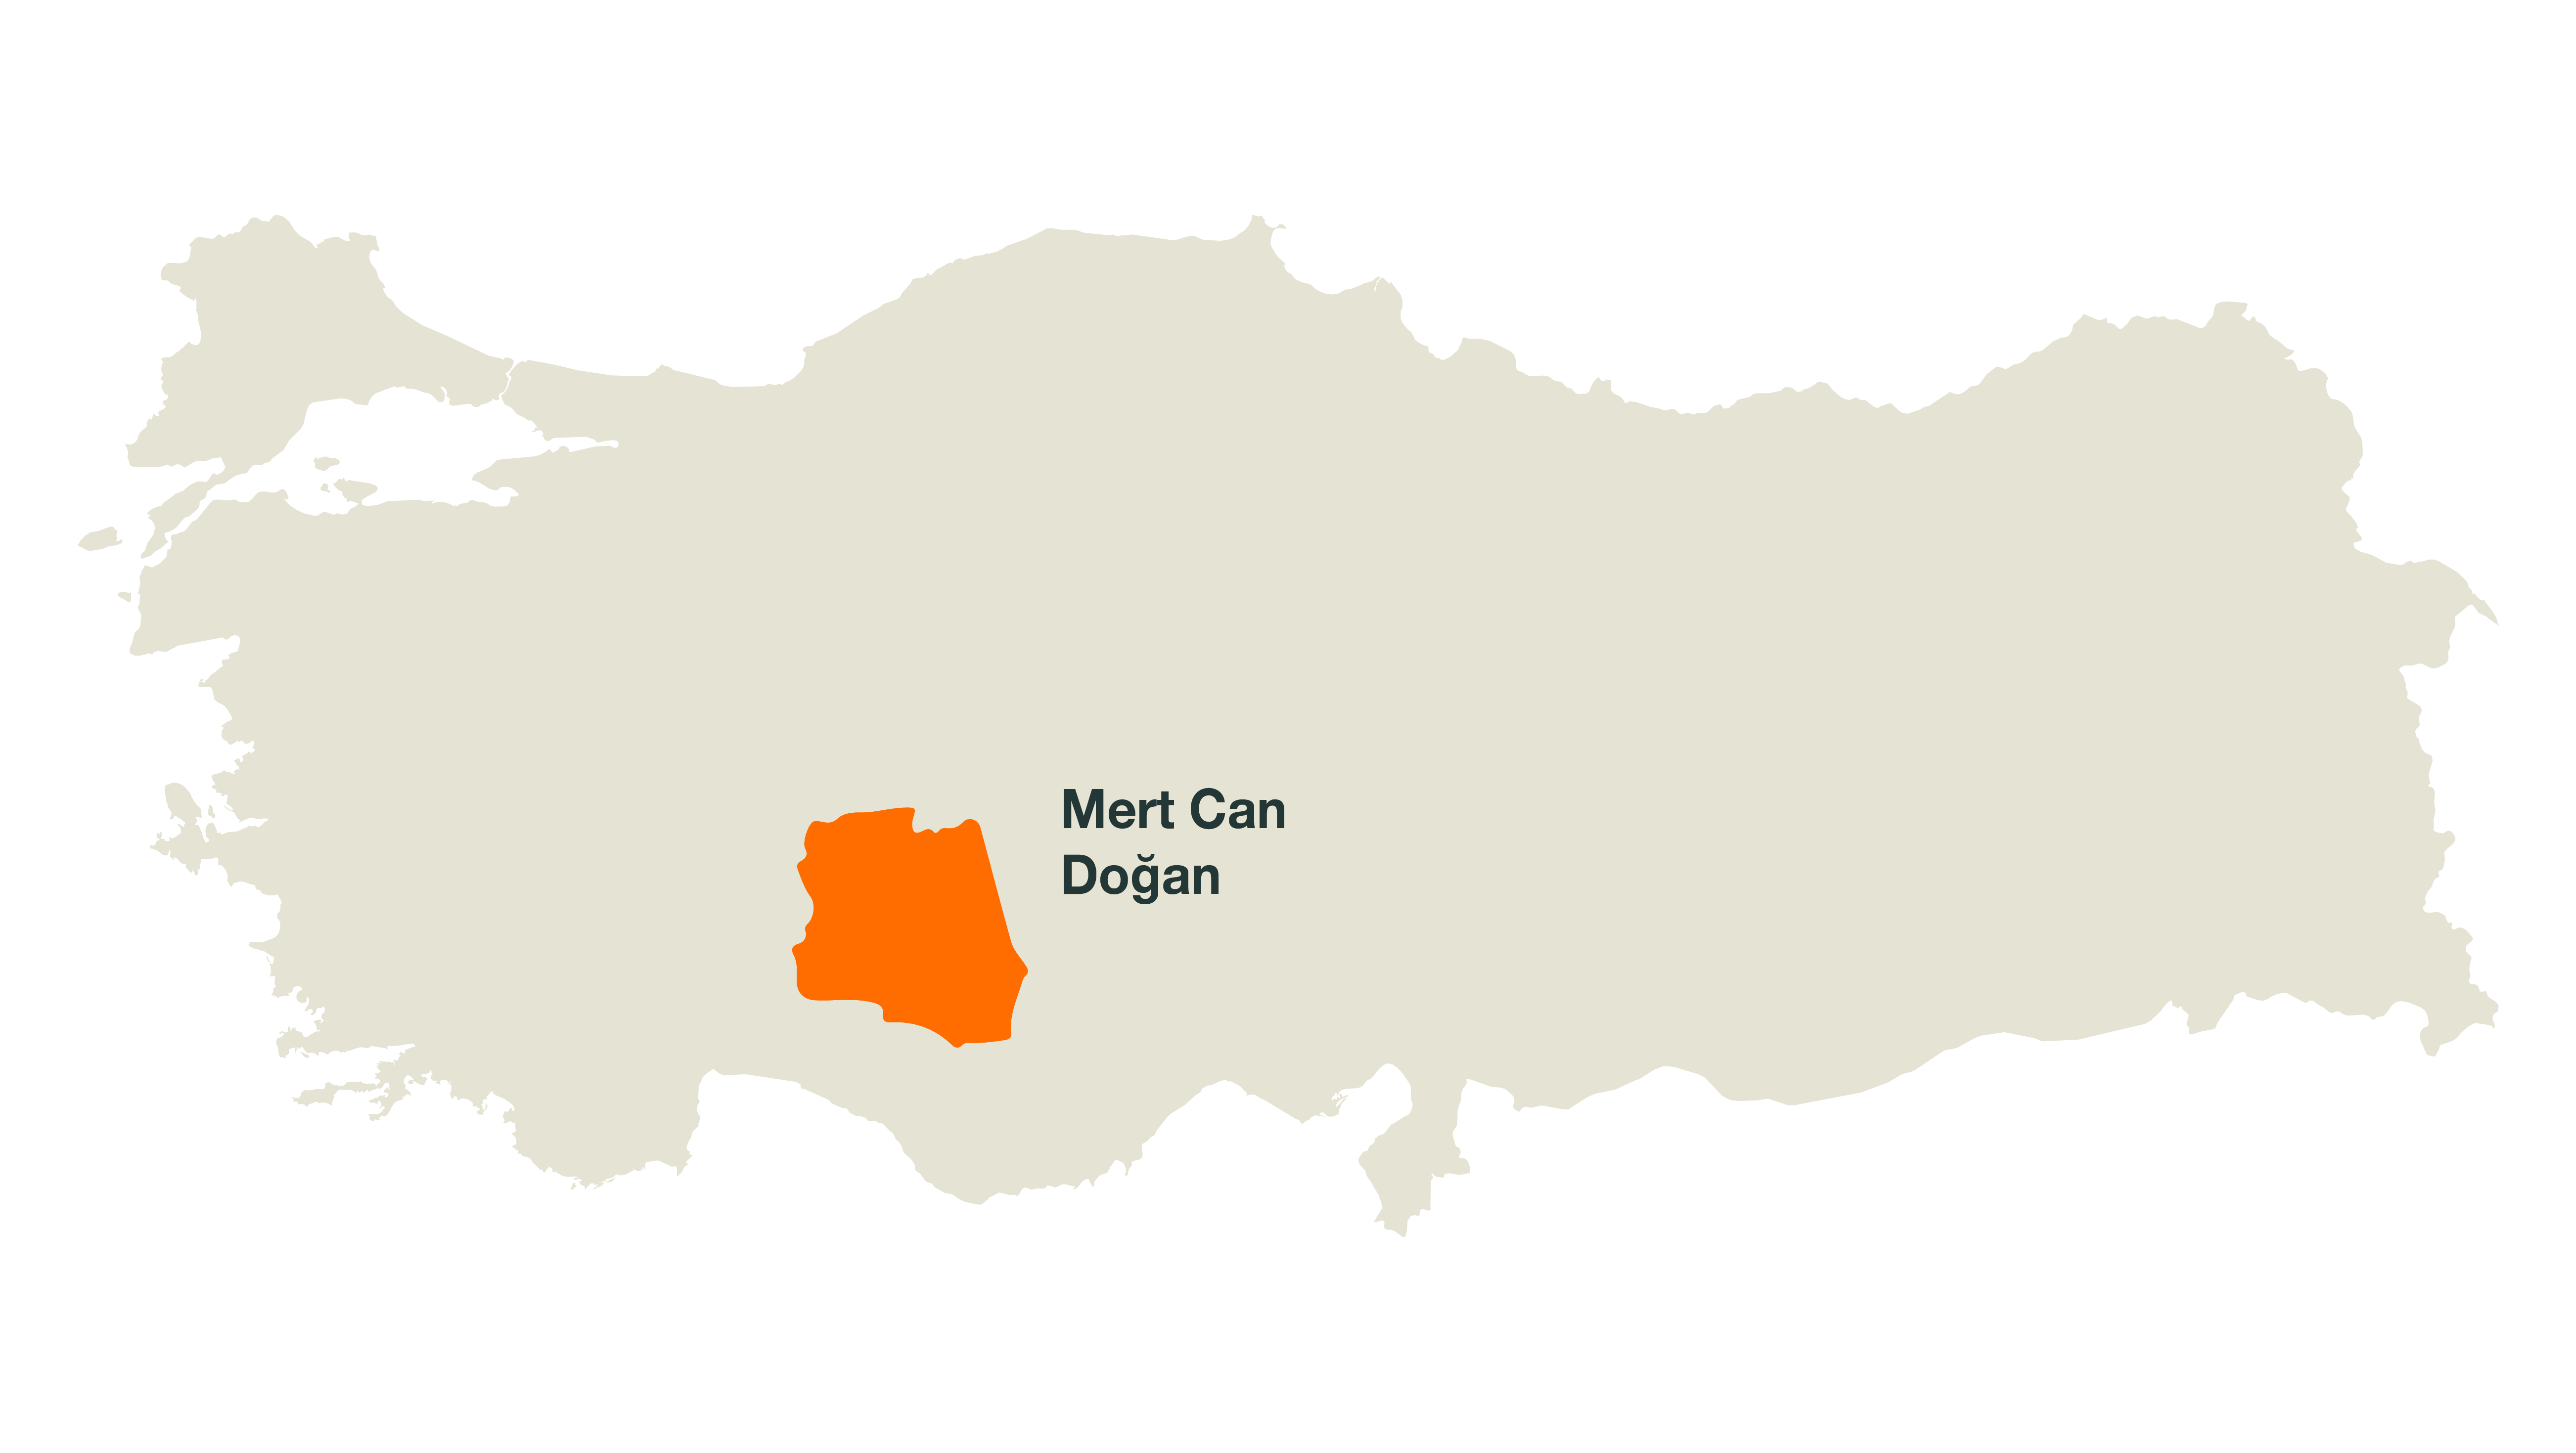 kws-tr-consultant-map-sugarbeet-mert-can-dogan.png